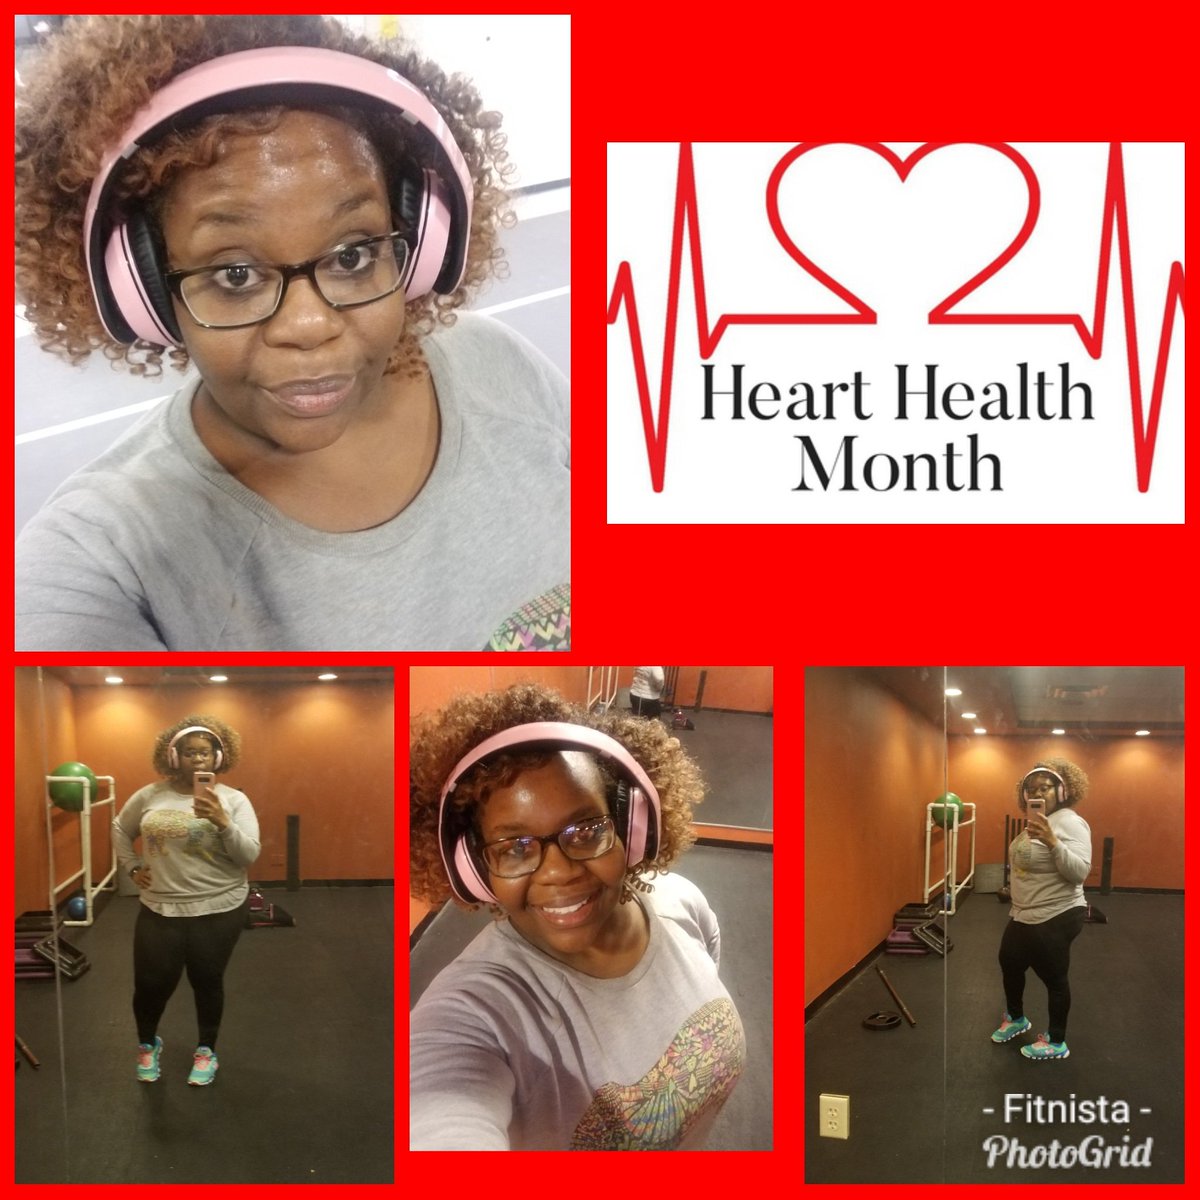 Kicking off American Heart Health Monday off with some fire cardio!

Get up move and get that heart to pumping! 💪❤
#hearthealth #AKAPINKGOESRED #february #fightheartdisease